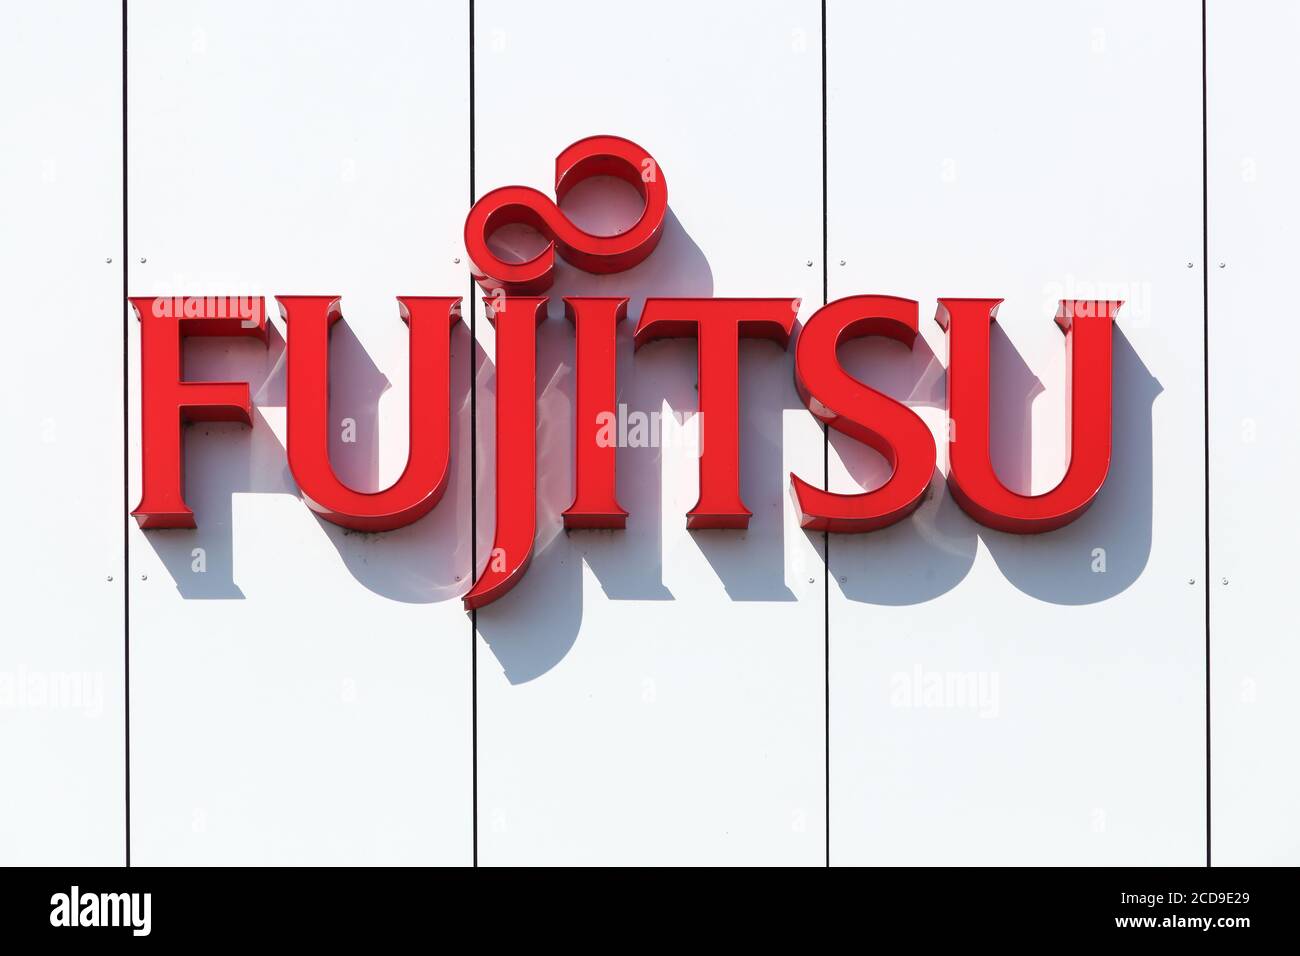 Aarhus, Denmark - August 22, 2015: Fujitsu logo on a wall. Fujitsu is a Japanese multinational information technology equipment and services company Stock Photo